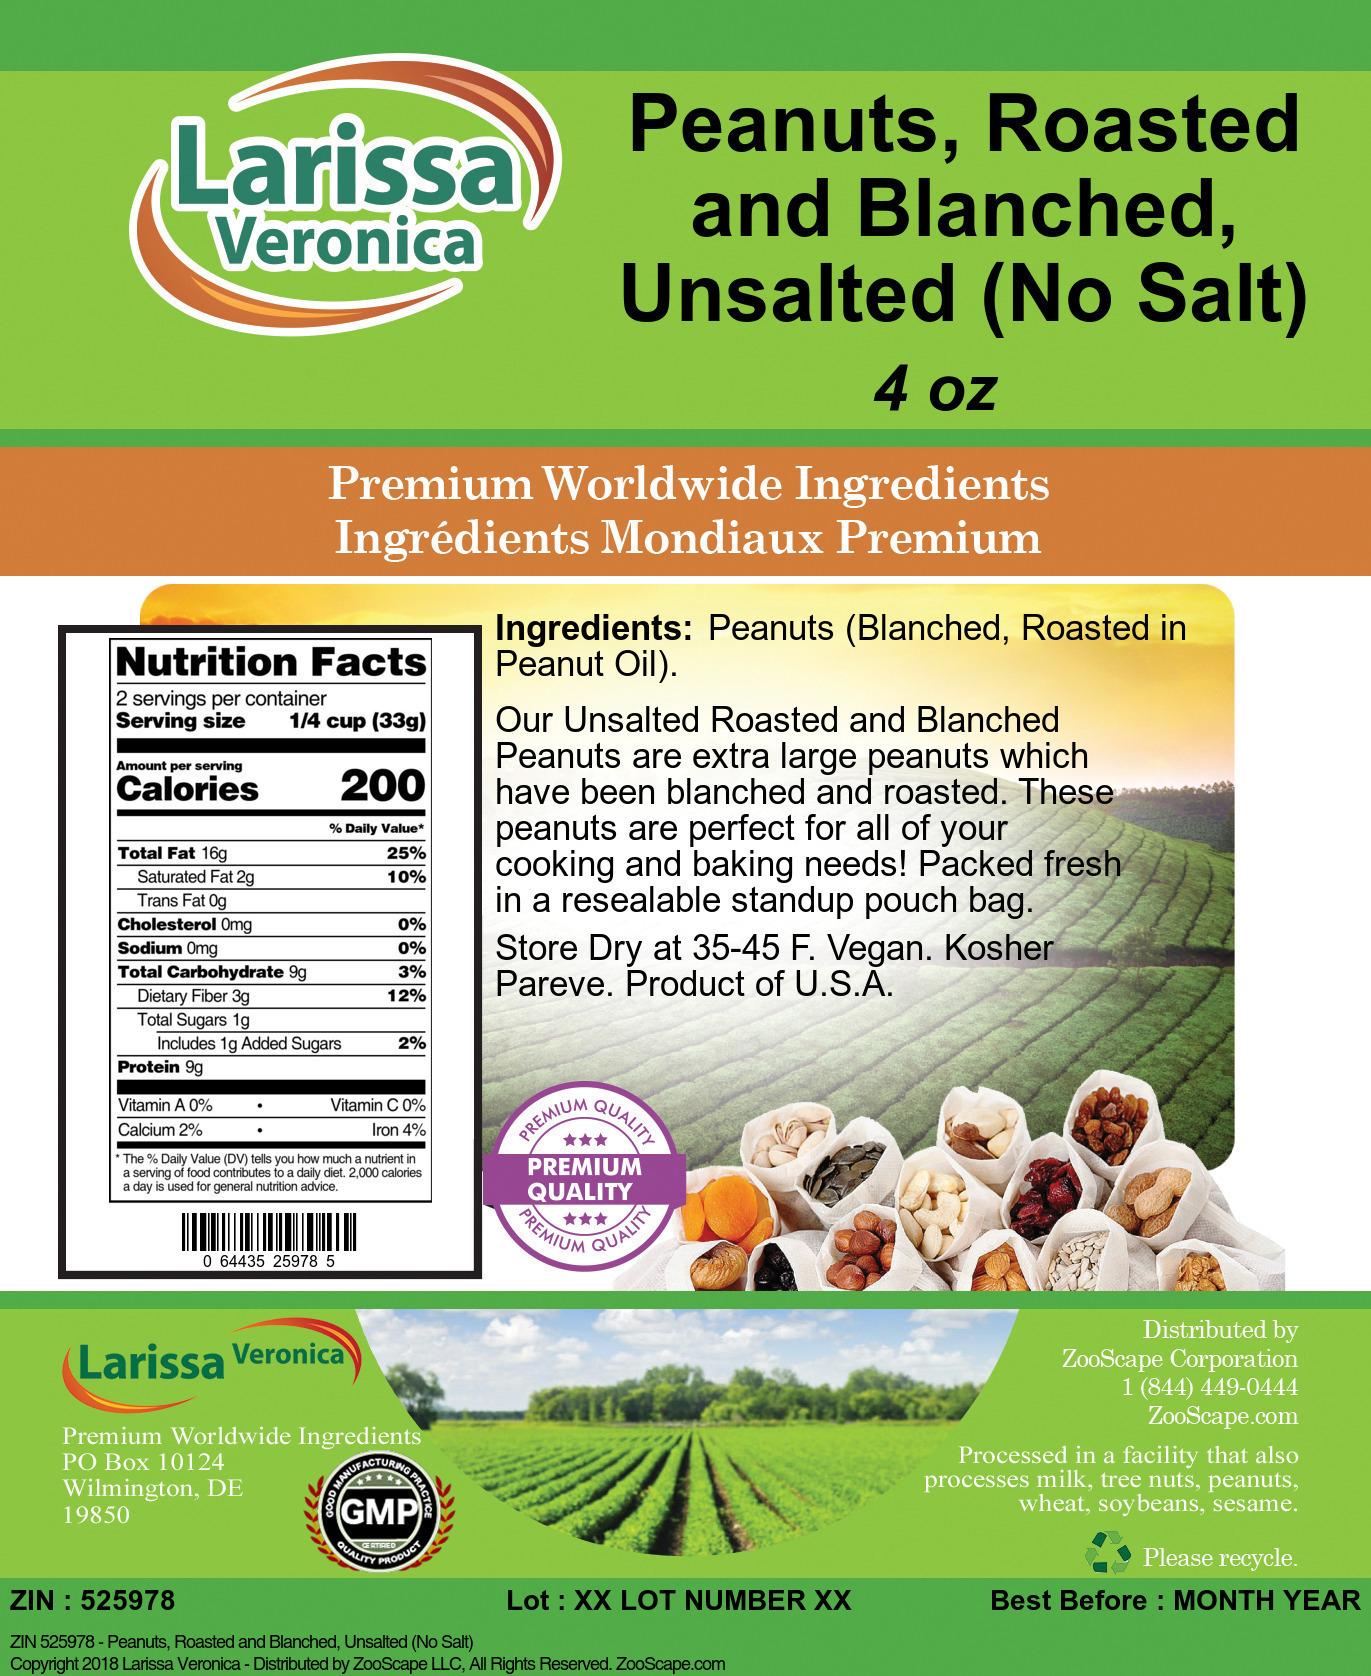 Peanuts, Roasted and Blanched, Unsalted (No Salt) - Label